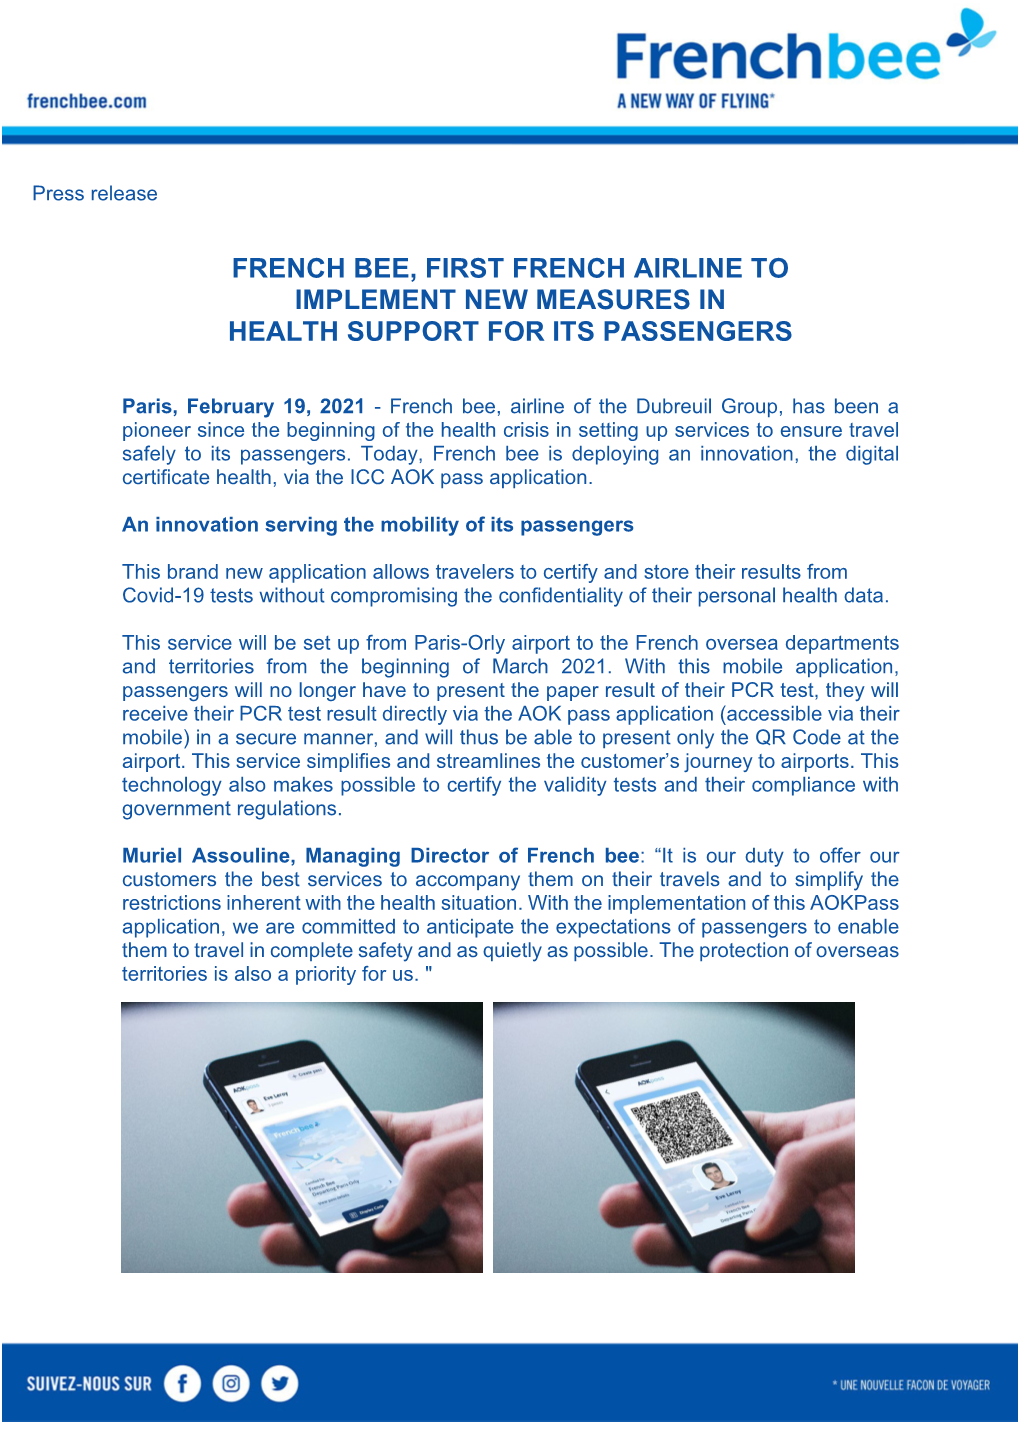 French Bee, First French Airline to Implement New Measures in Health Support for Its Passengers